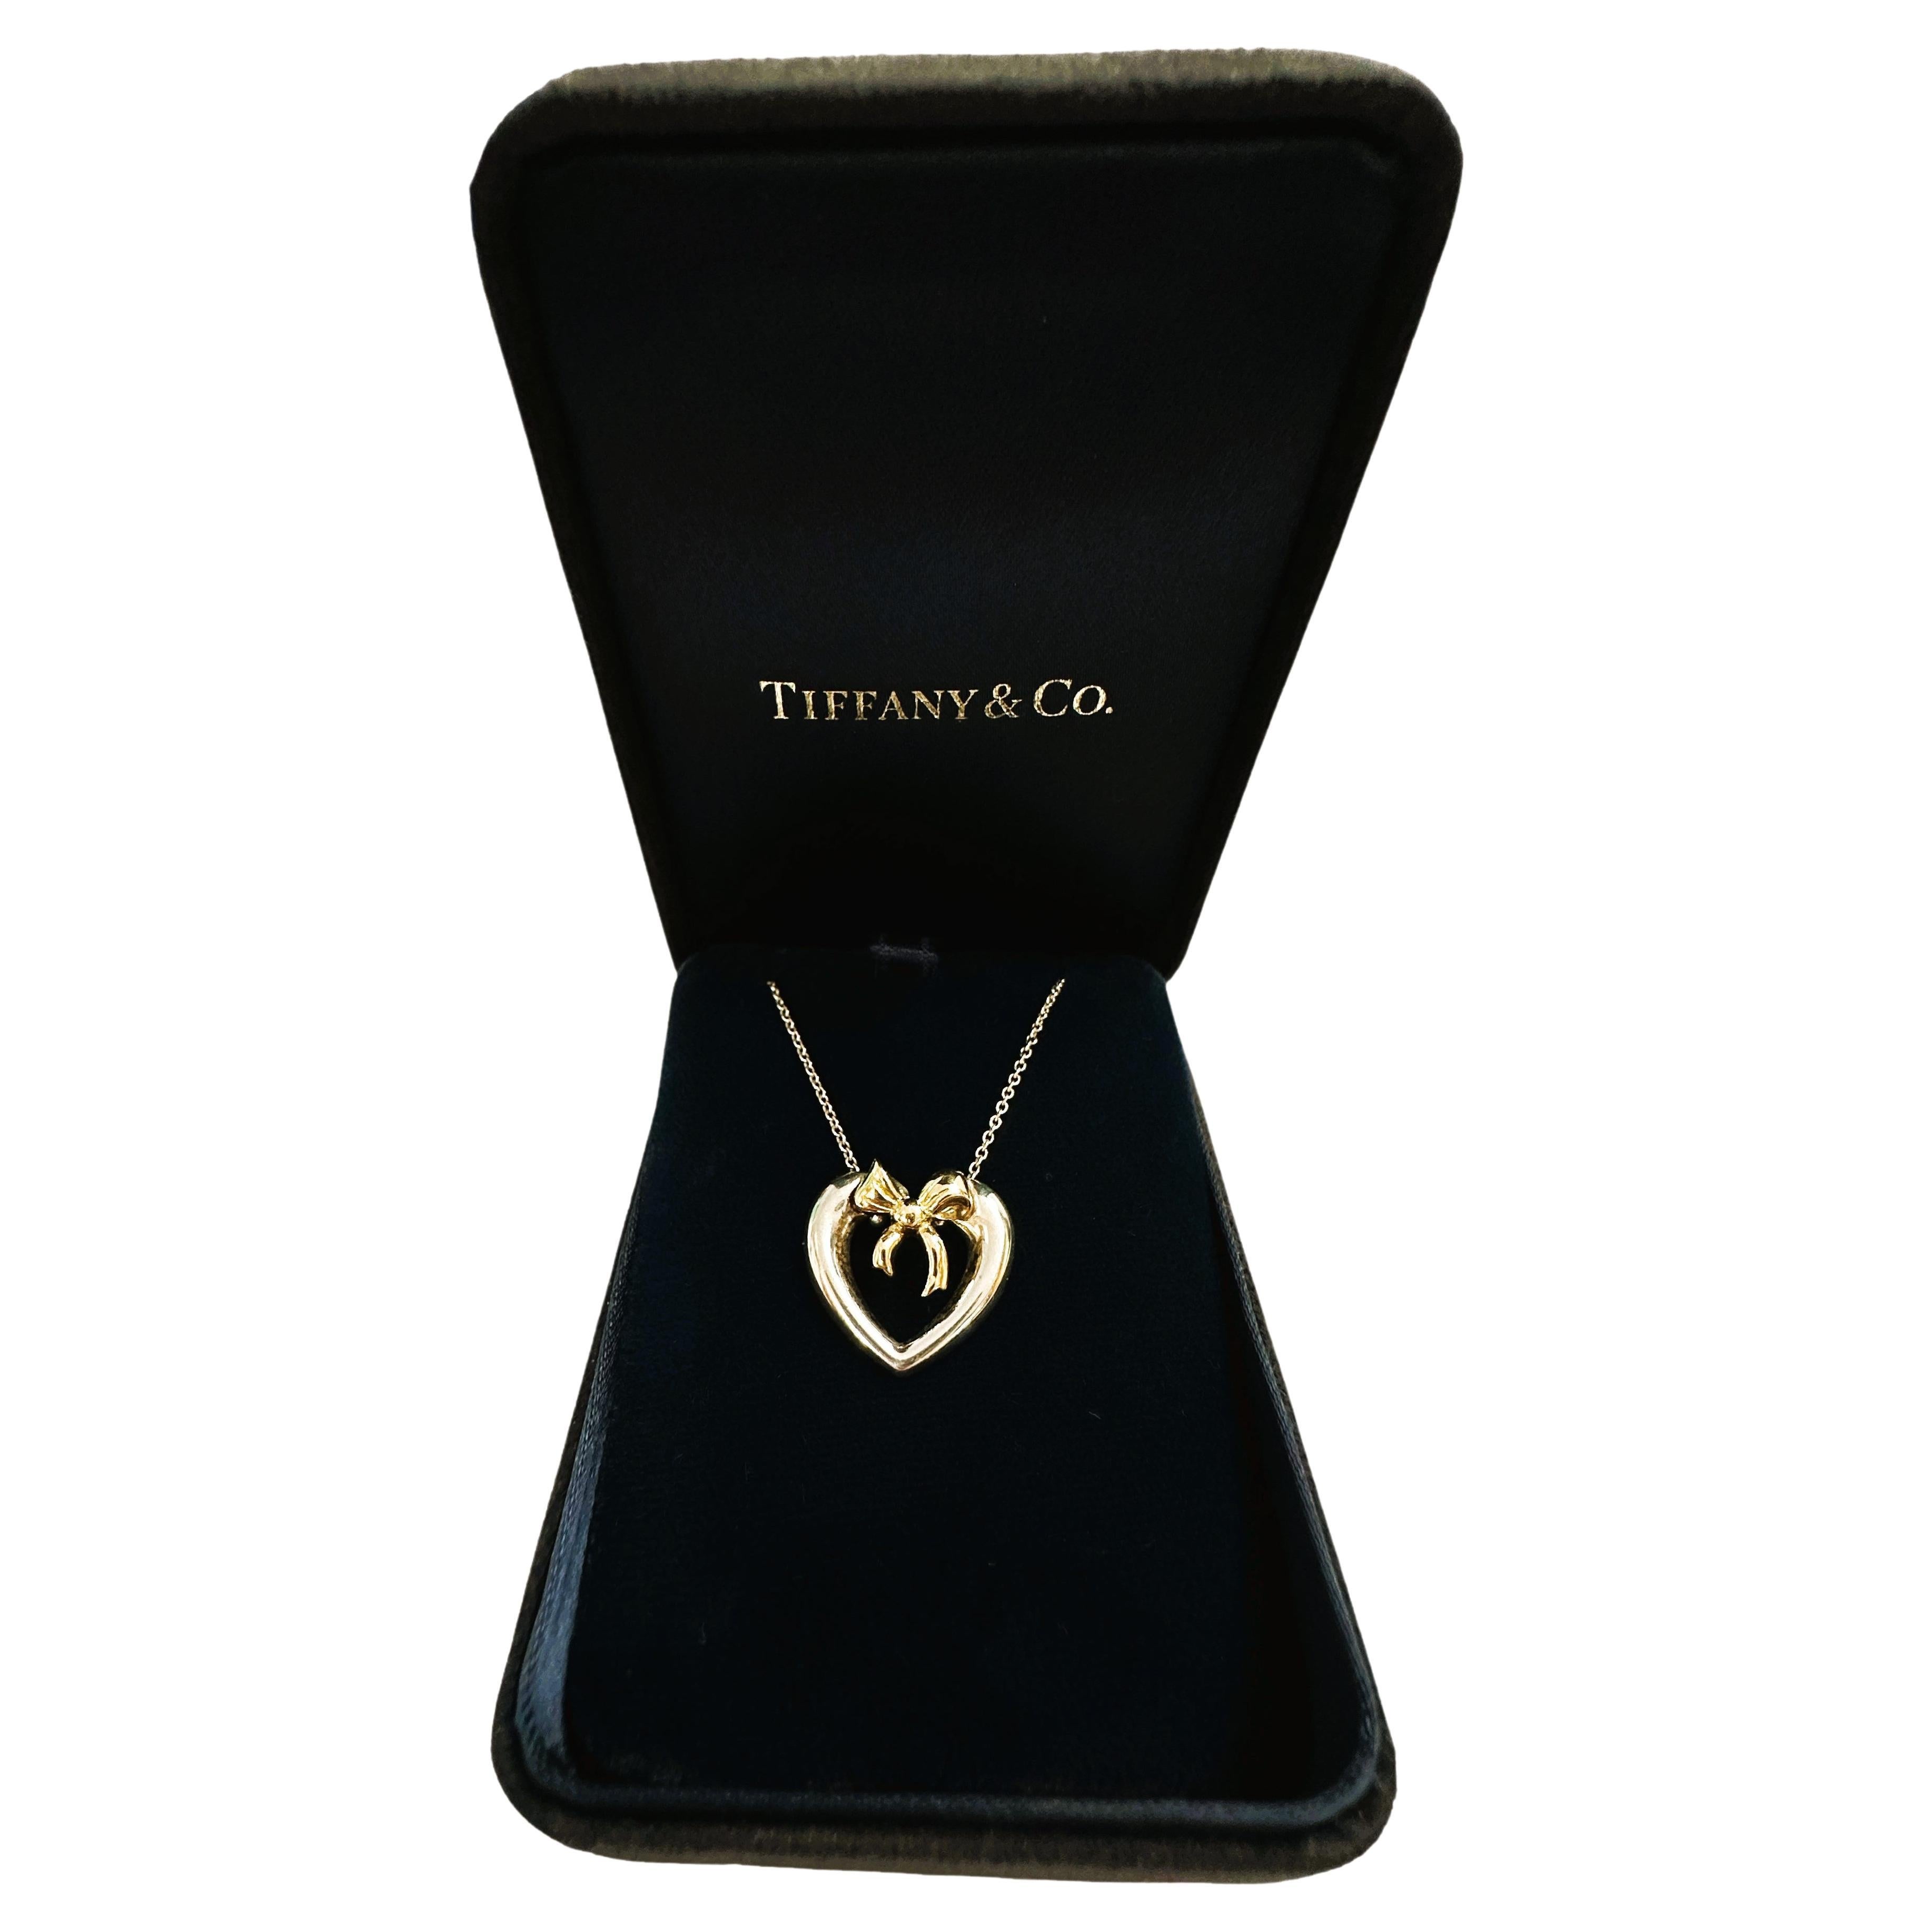 Vintage 1991 Tiffany & Co. 18K Gold Bow Sterling Silver Heart Necklace